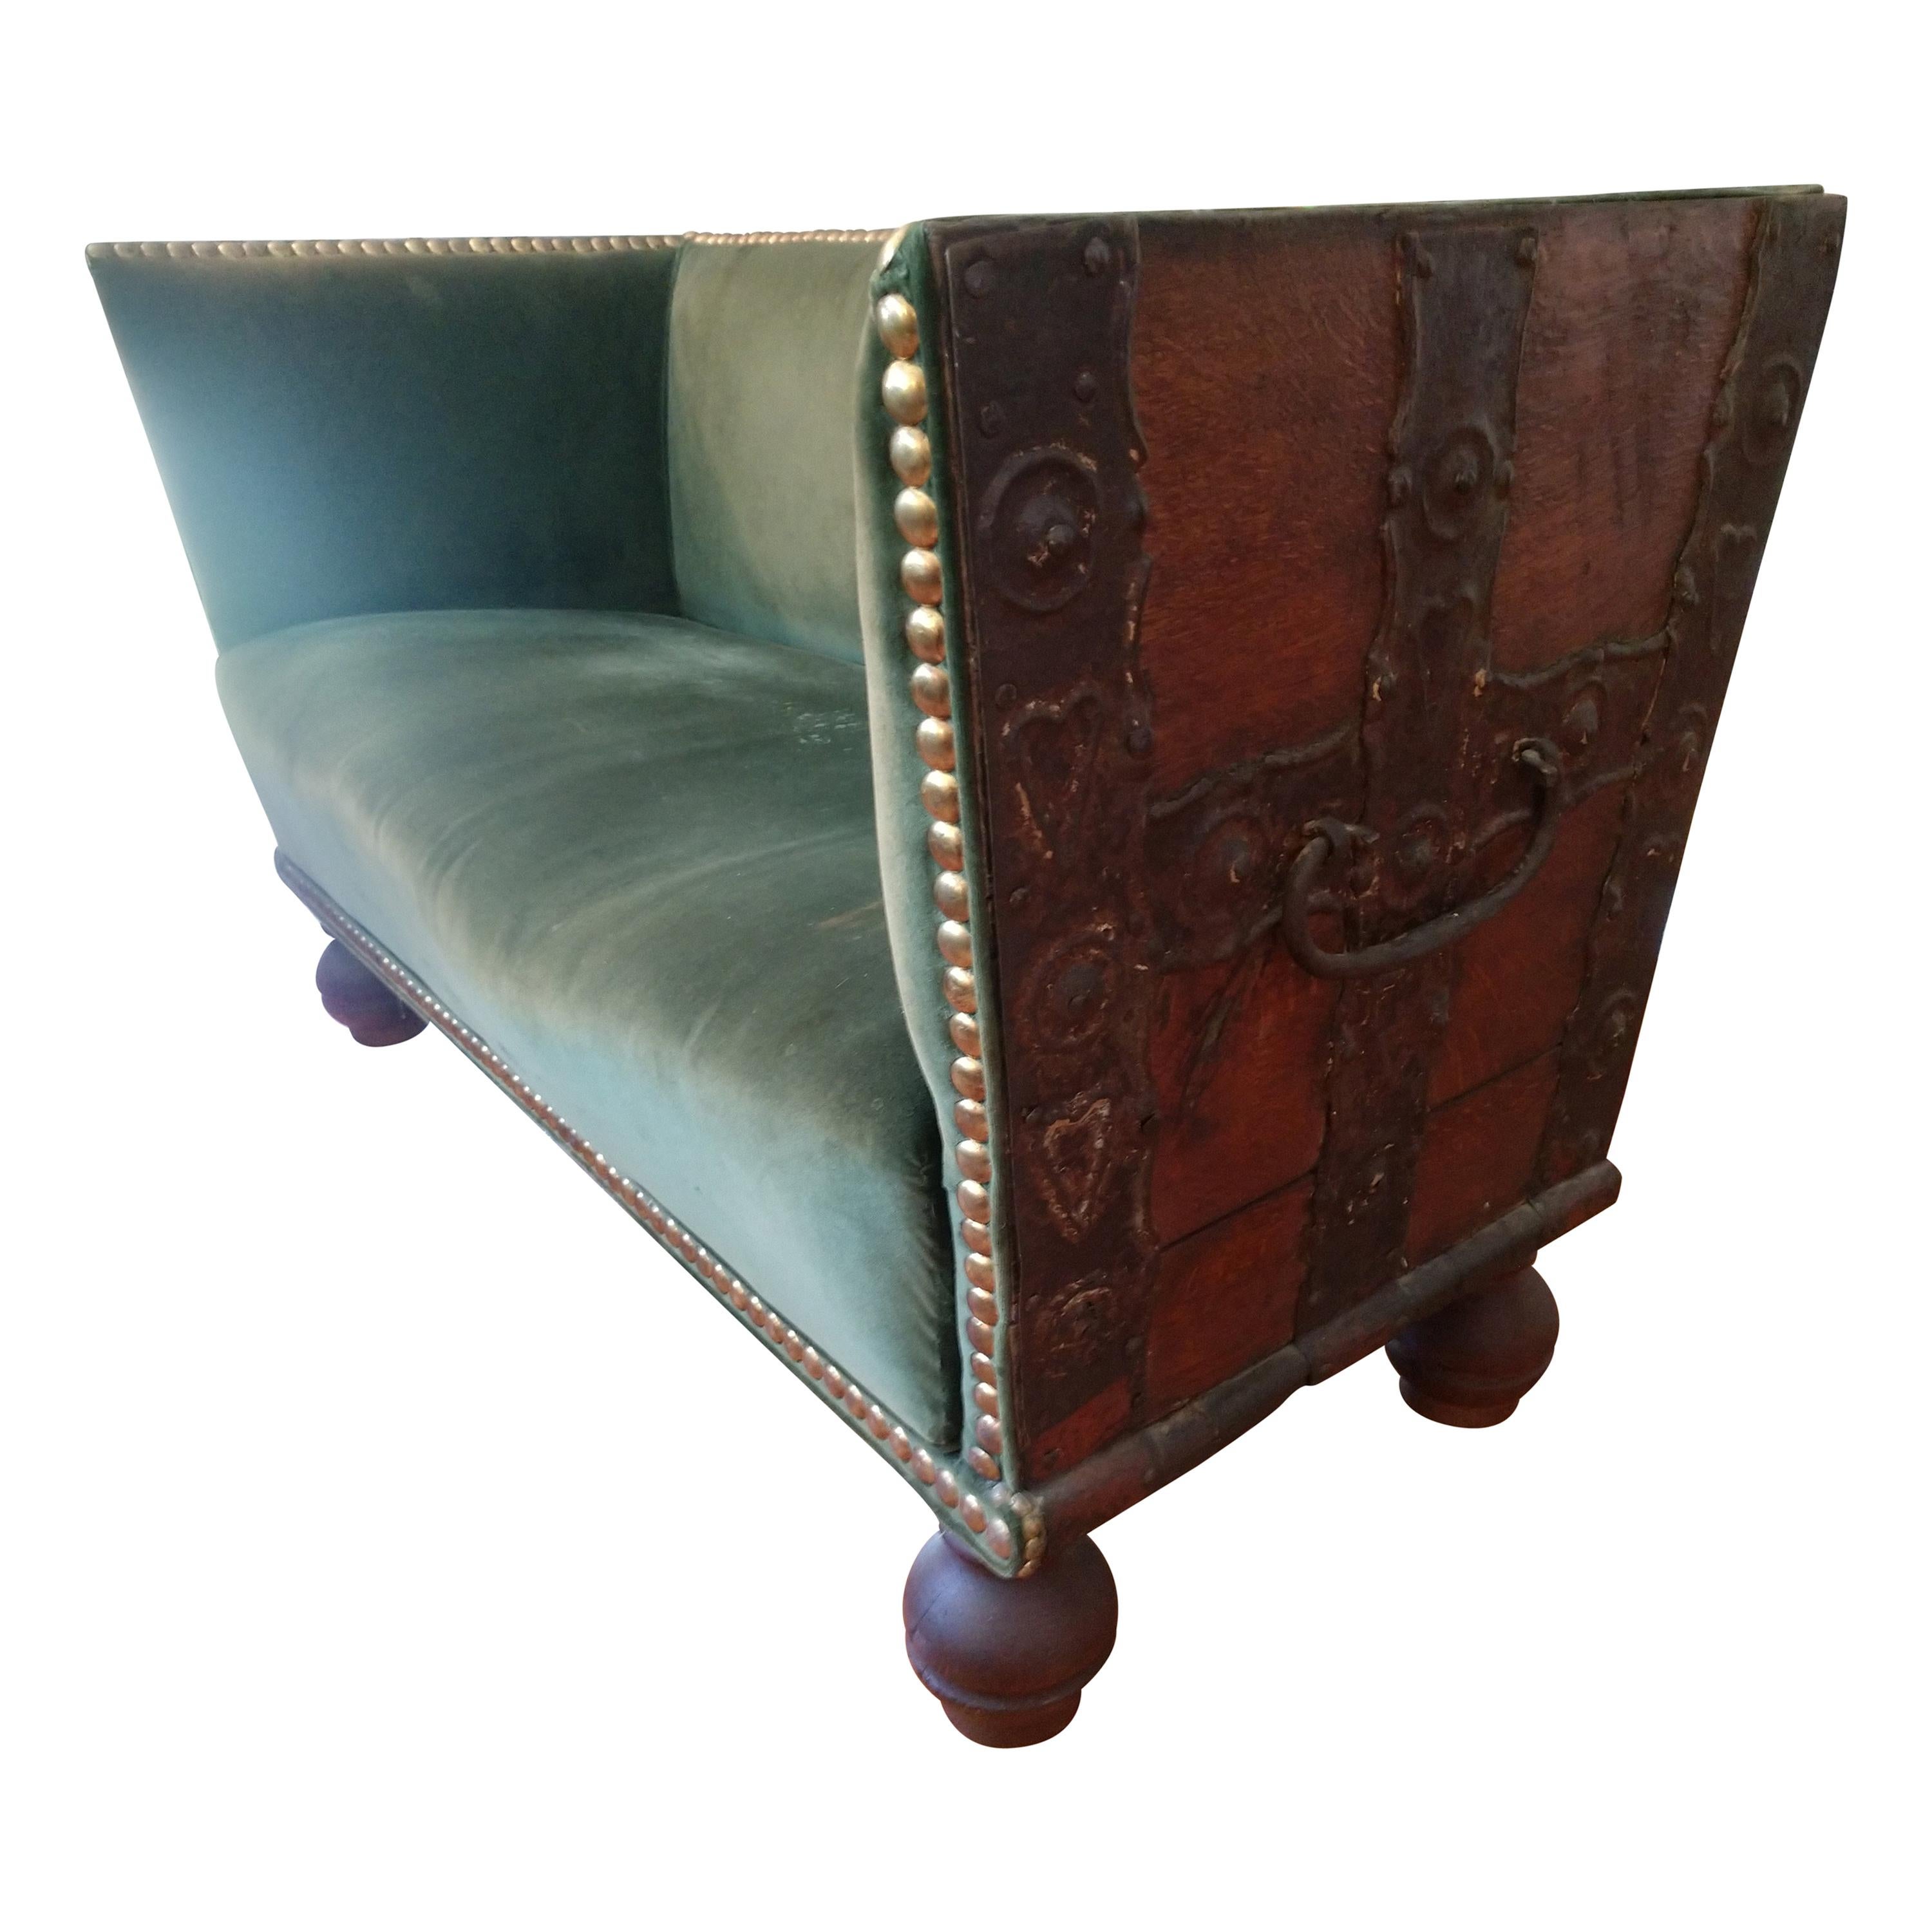 Early 18th Century Two Seat Sofa Treasure Chest Upholstered Settee